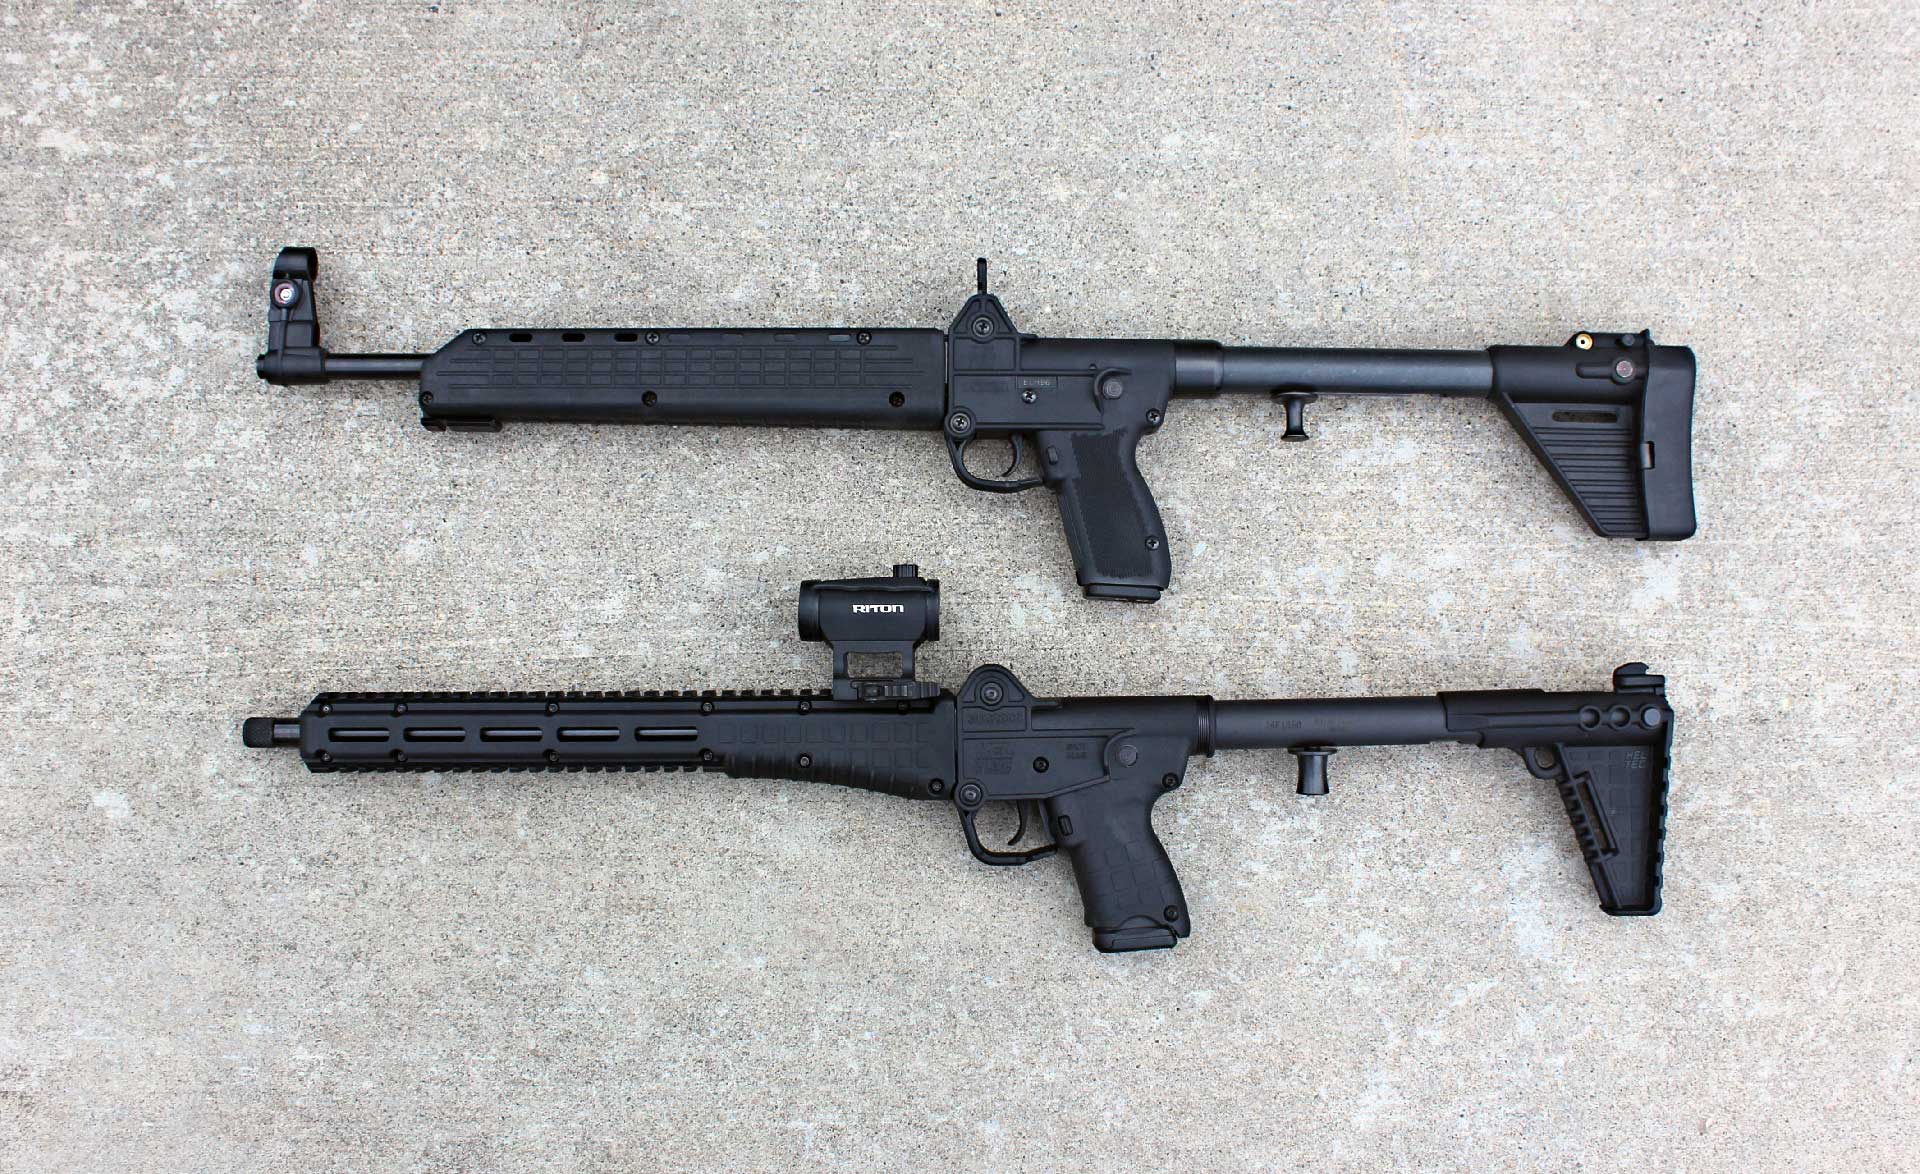 Two KelTec SUB2000 carbines shown side-by-side on a concrete ground.